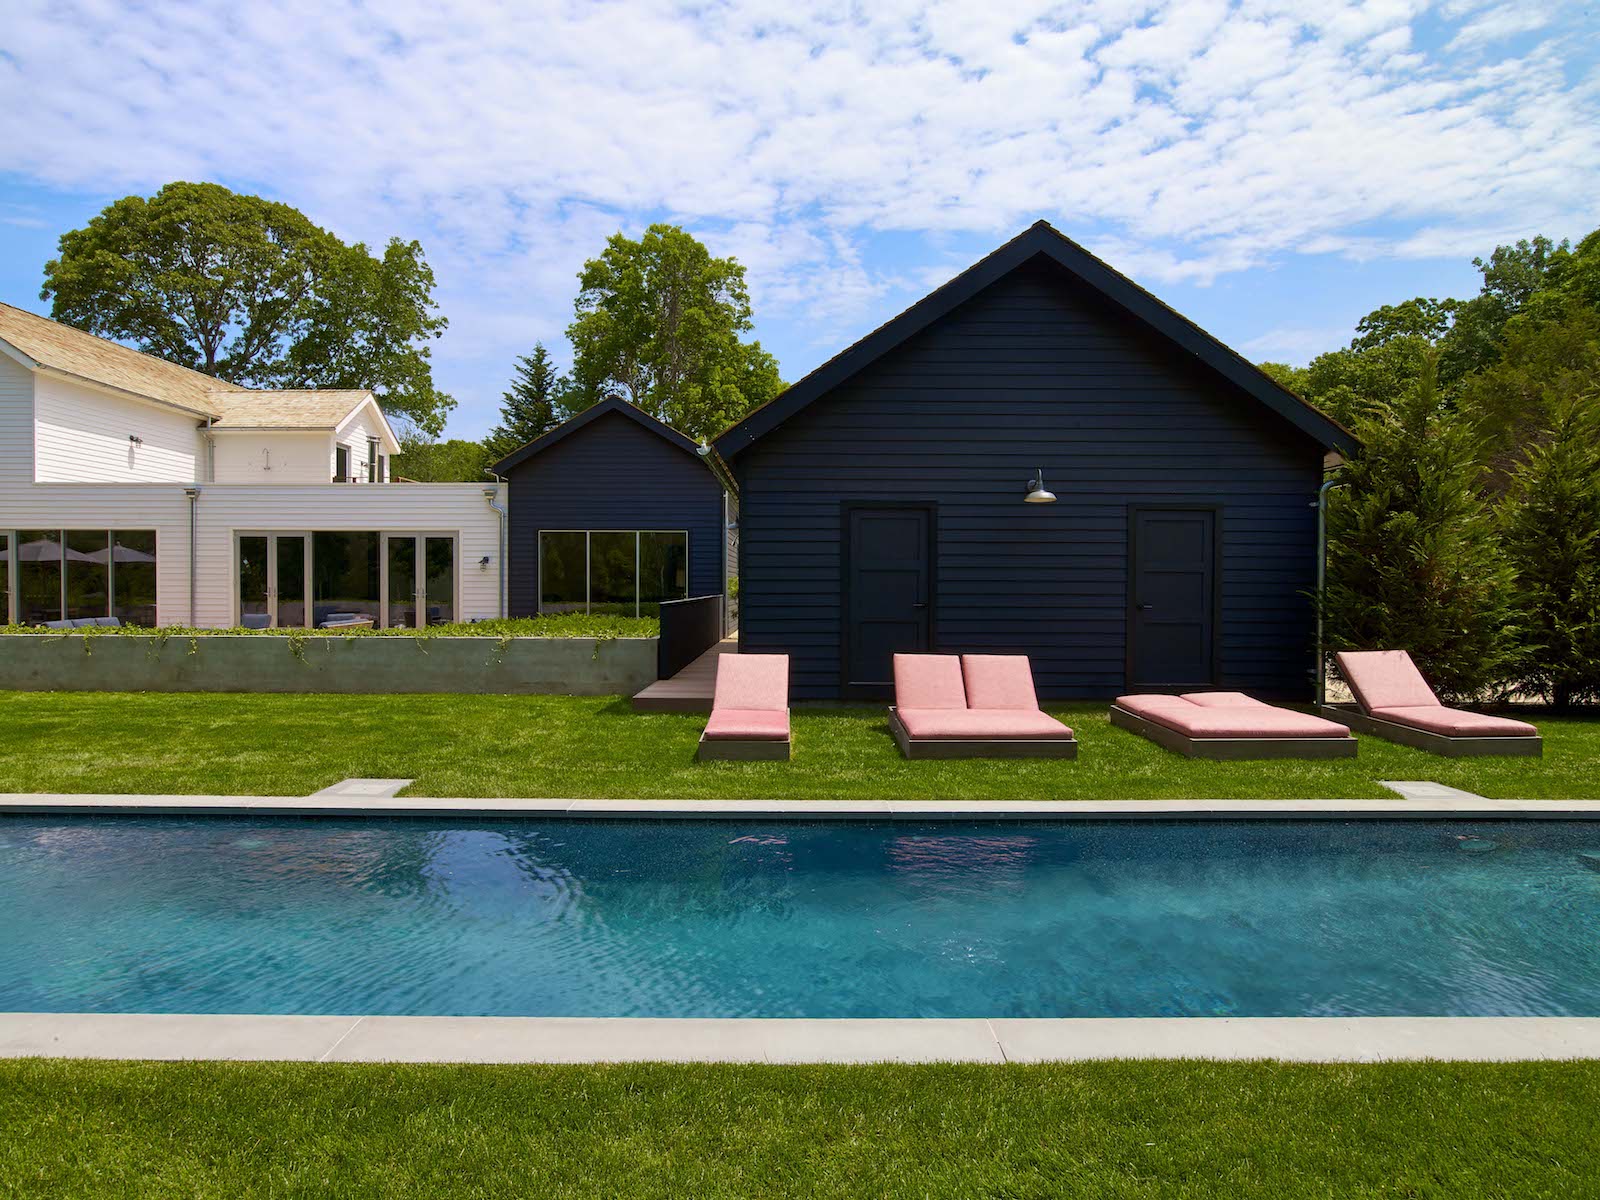 The Latest Trend In Architecture For Summer Homes Black